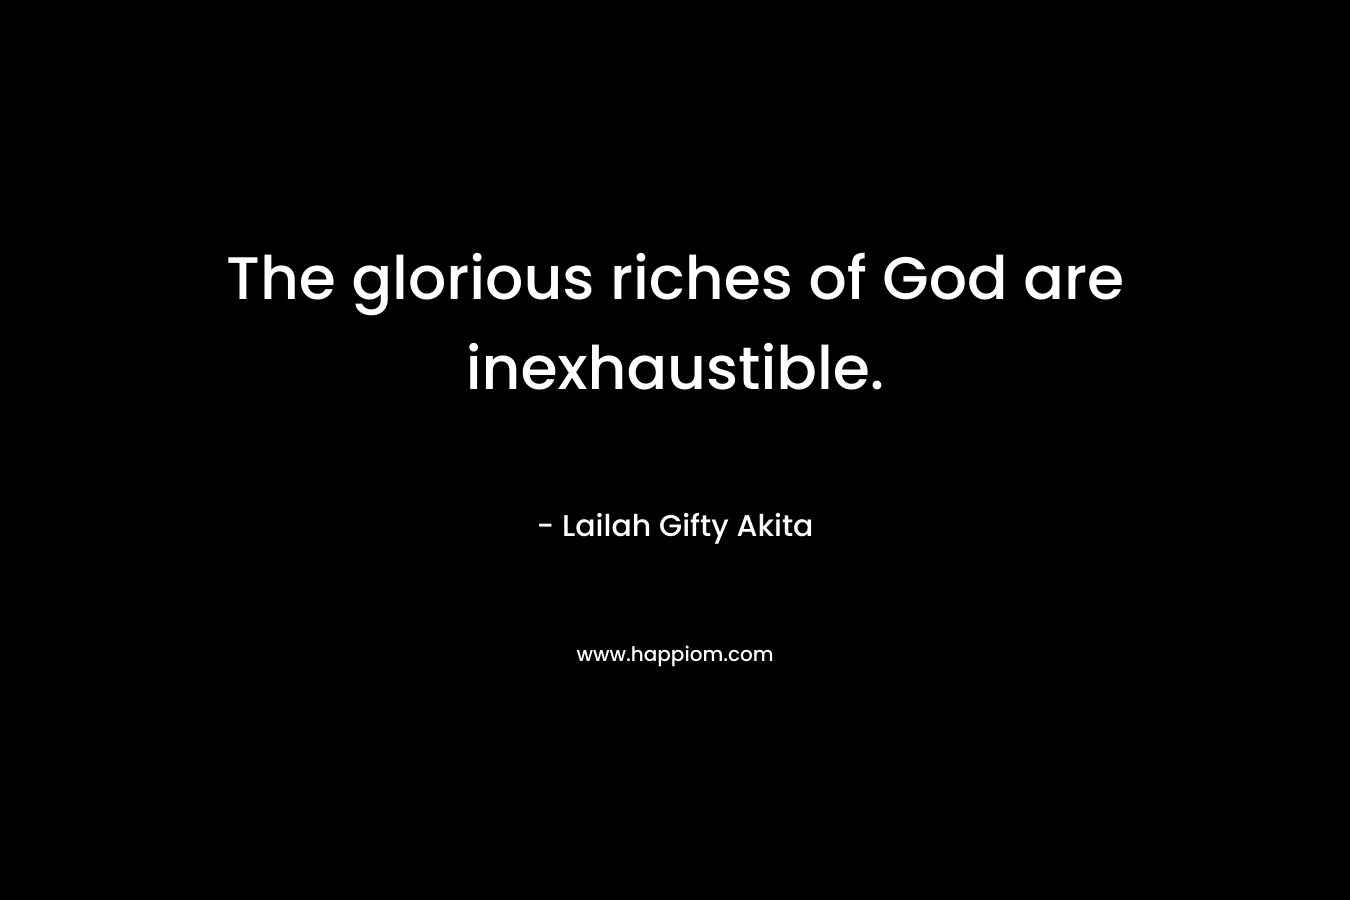 The glorious riches of God are inexhaustible.